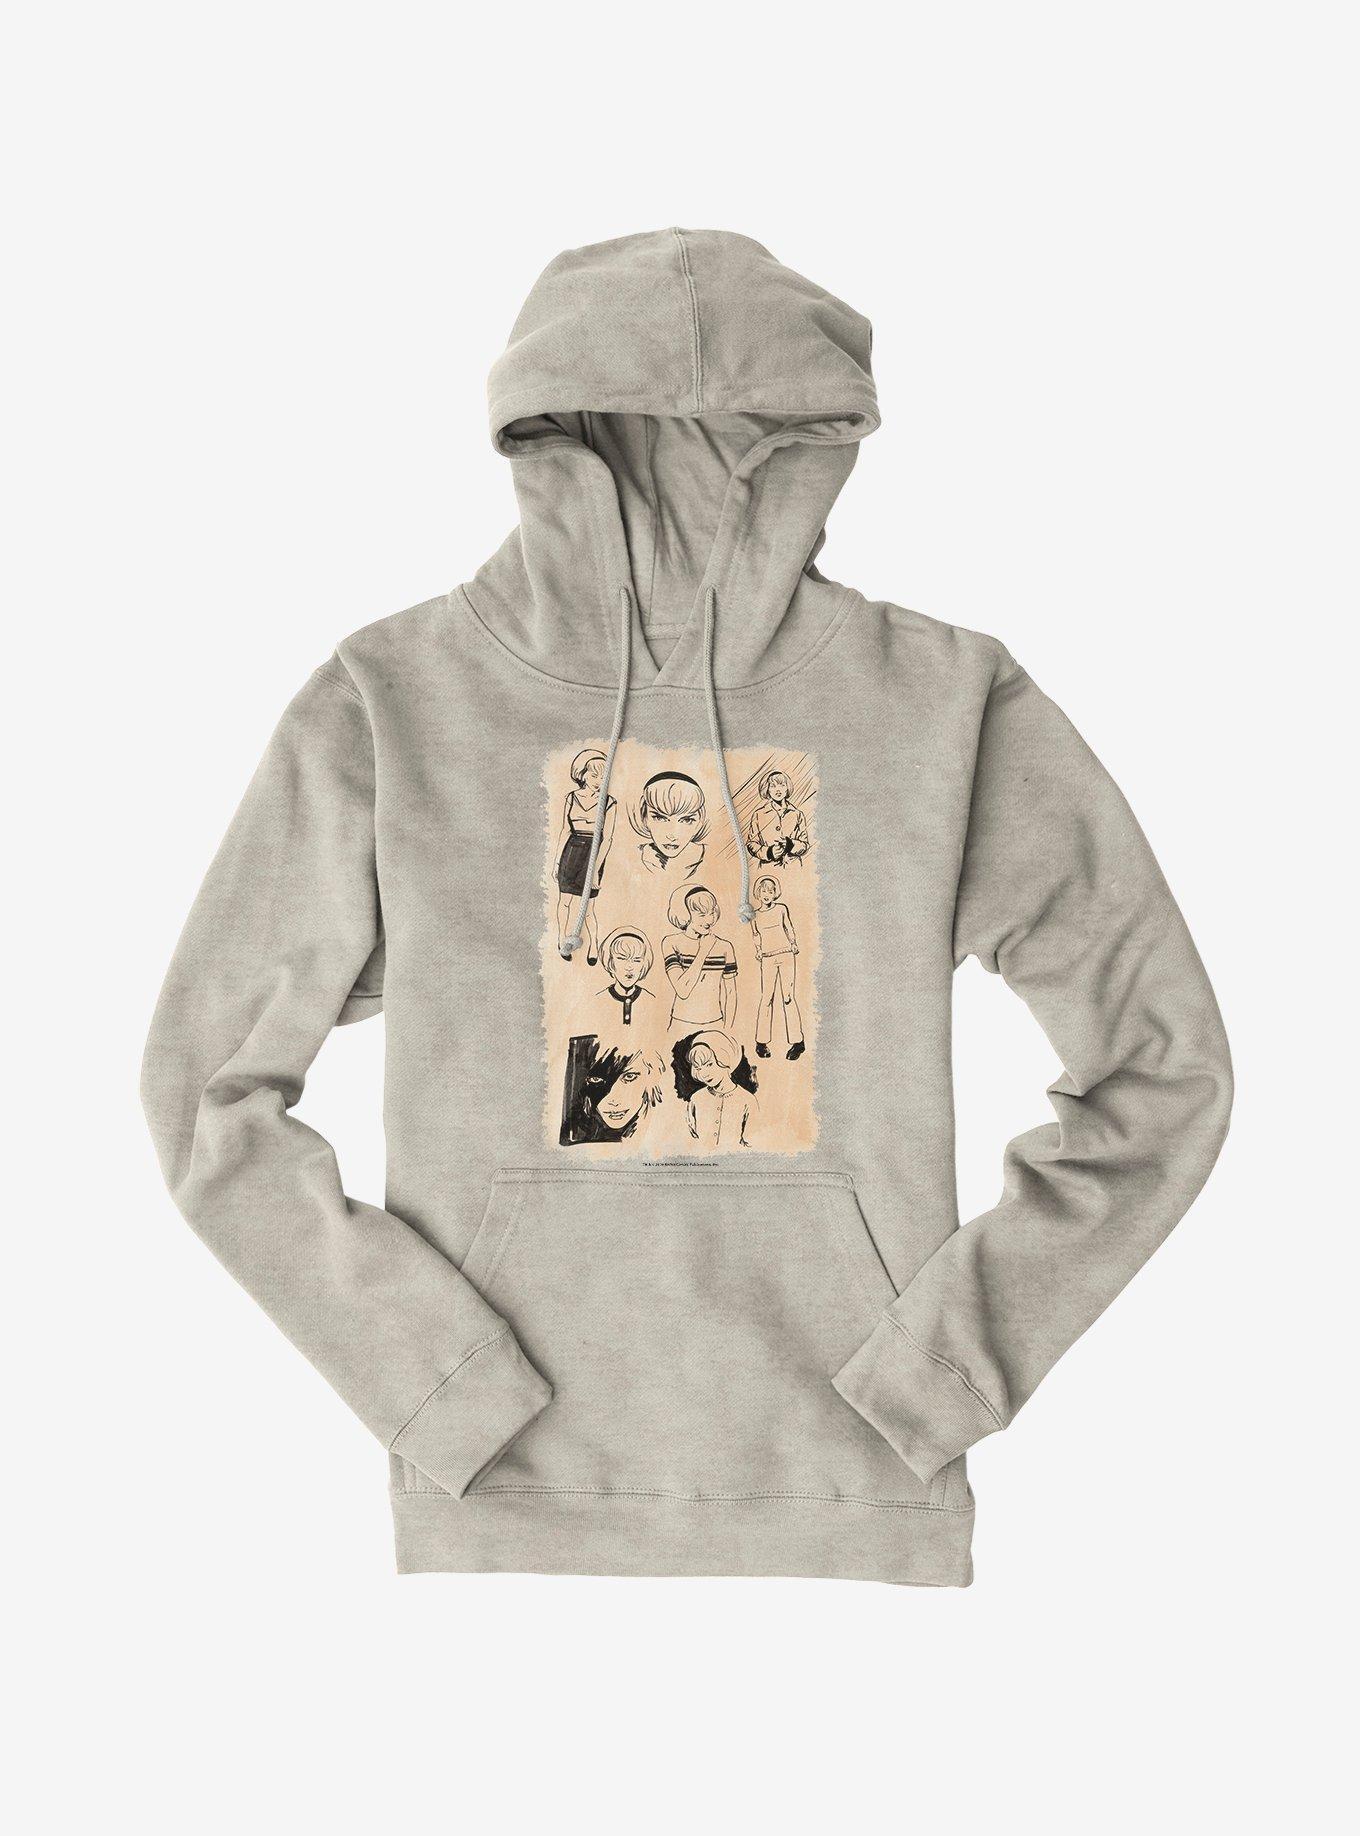 Archie Comics Chilling Adventures of Sabrina Sketches Hoodie | Hot Topic